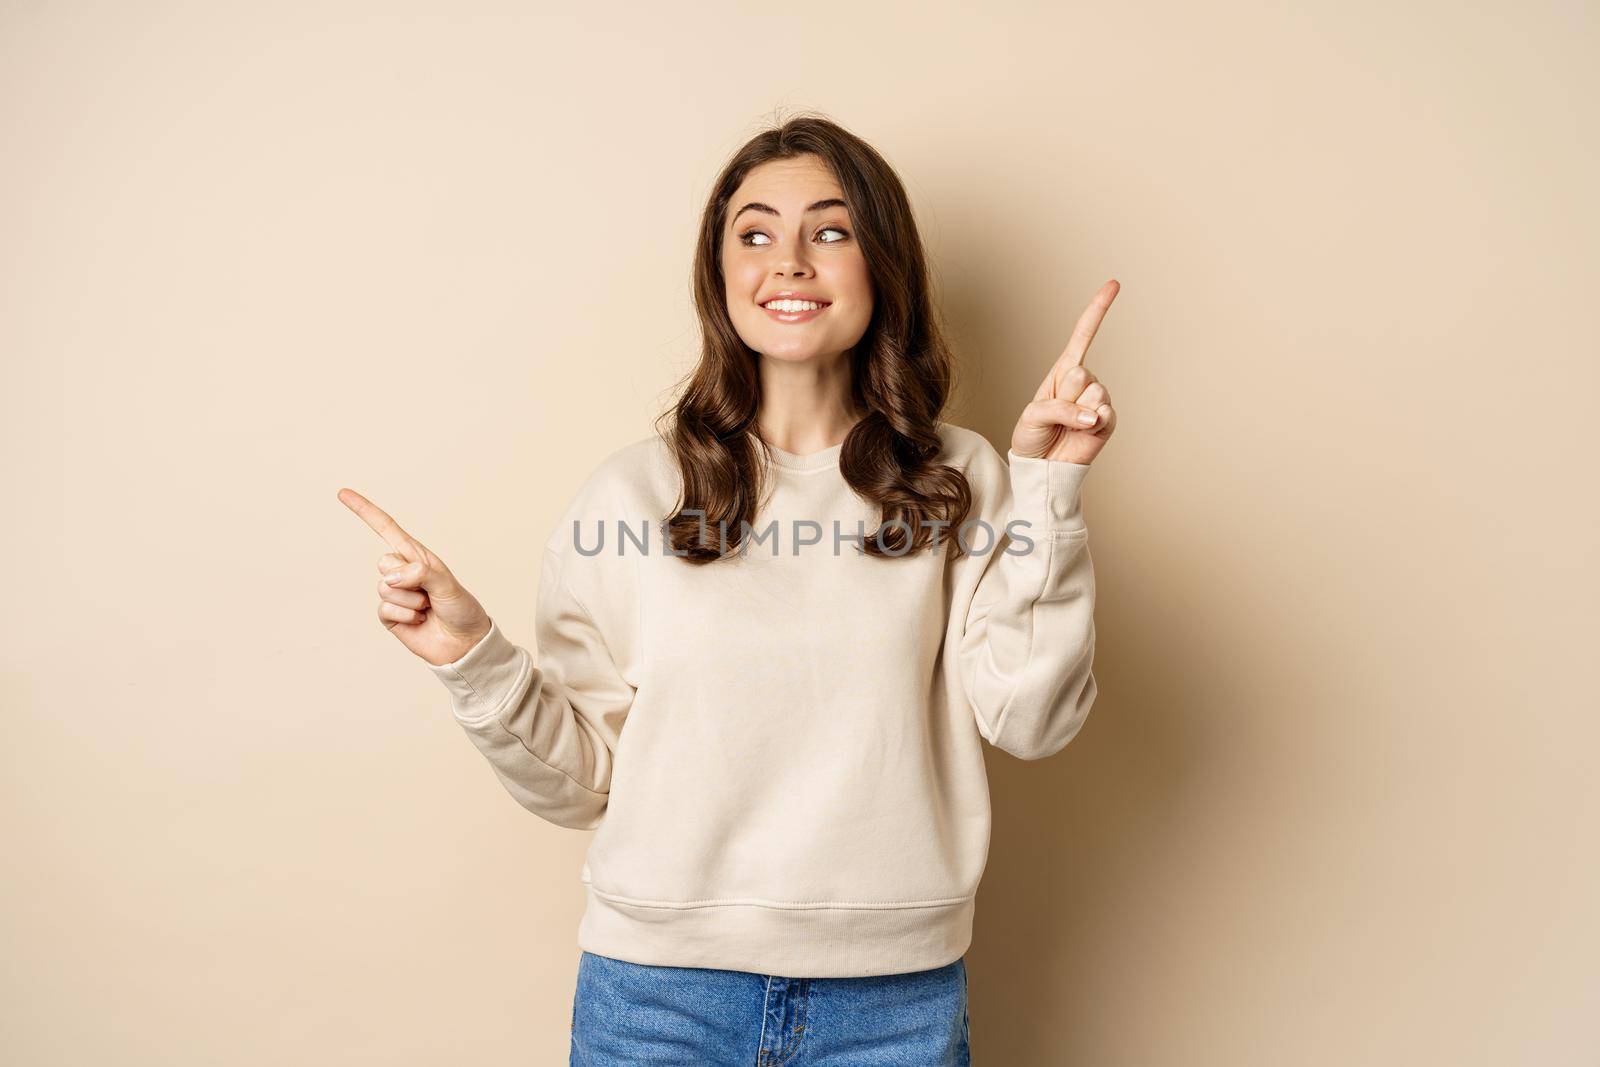 Cheerful caucasian woman showing directions, two ways, pointing sideways at variants, choices for customer, standing over beige background.